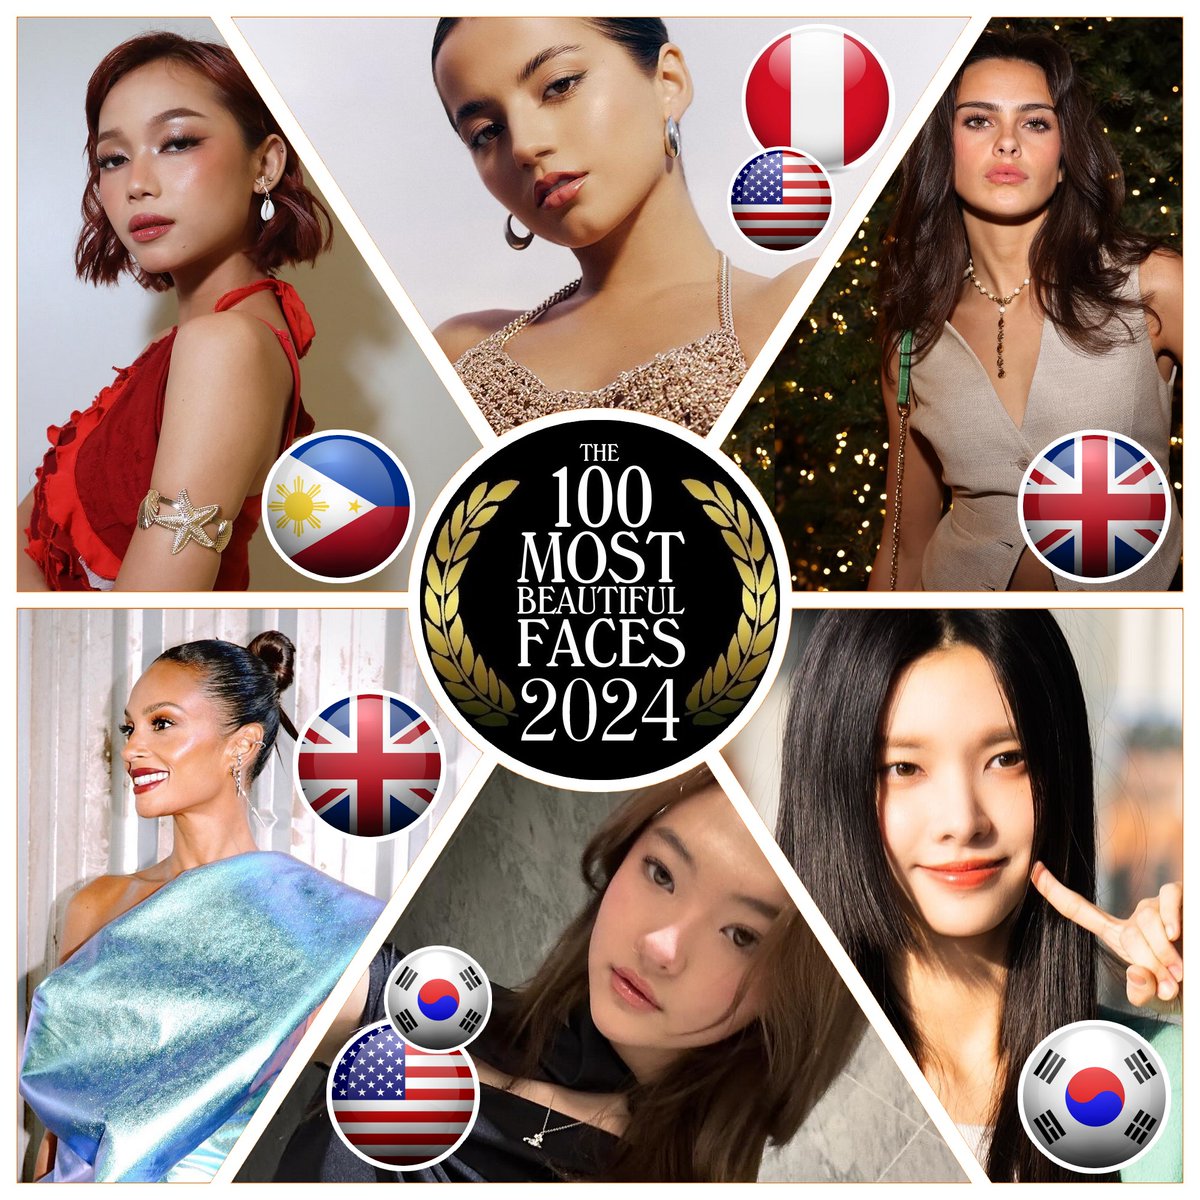 Which Face Should Be Nominated? These are the faces nominated today. Nominate & Vote for the Top 100 of 2024 -patreon.com/tccandler #tccandler #100faces2024 #gwen #bini #BINI_PH #isabelamerced #aliciabreuer #aleshadixon #ellagross #yg #yunah #ILLIT